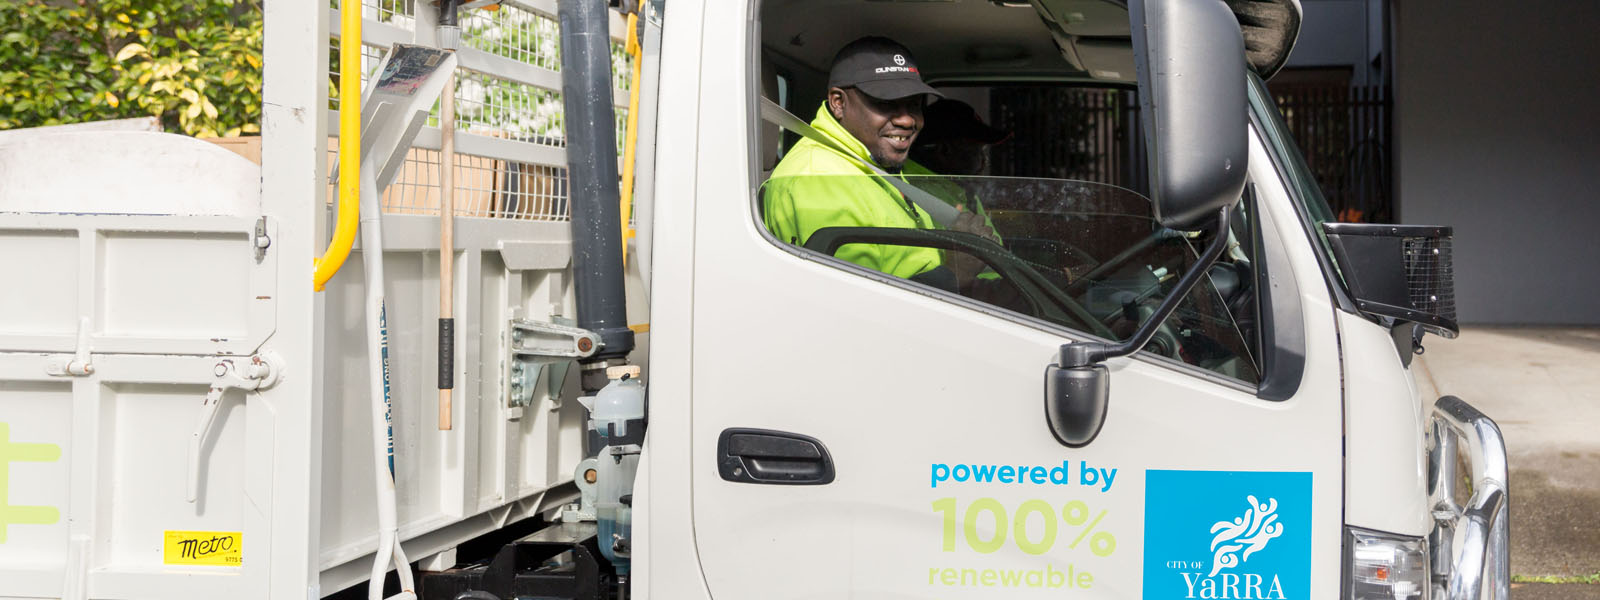 Council waste truck with smiling driver